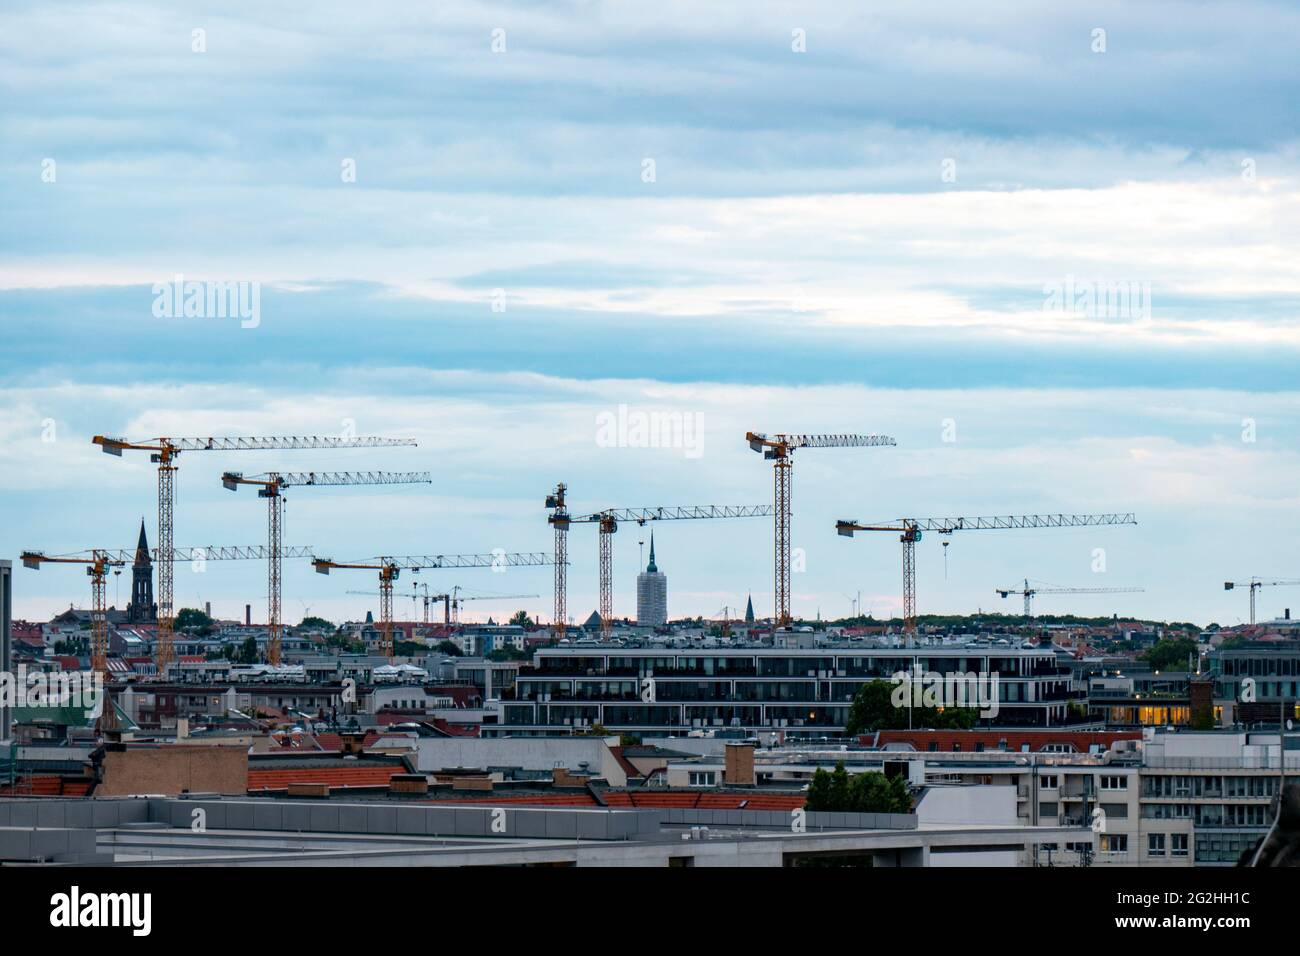 Construction cranes, view from the dome of the Reichstag building, Bundestag, Berlin, Germany Stock Photo